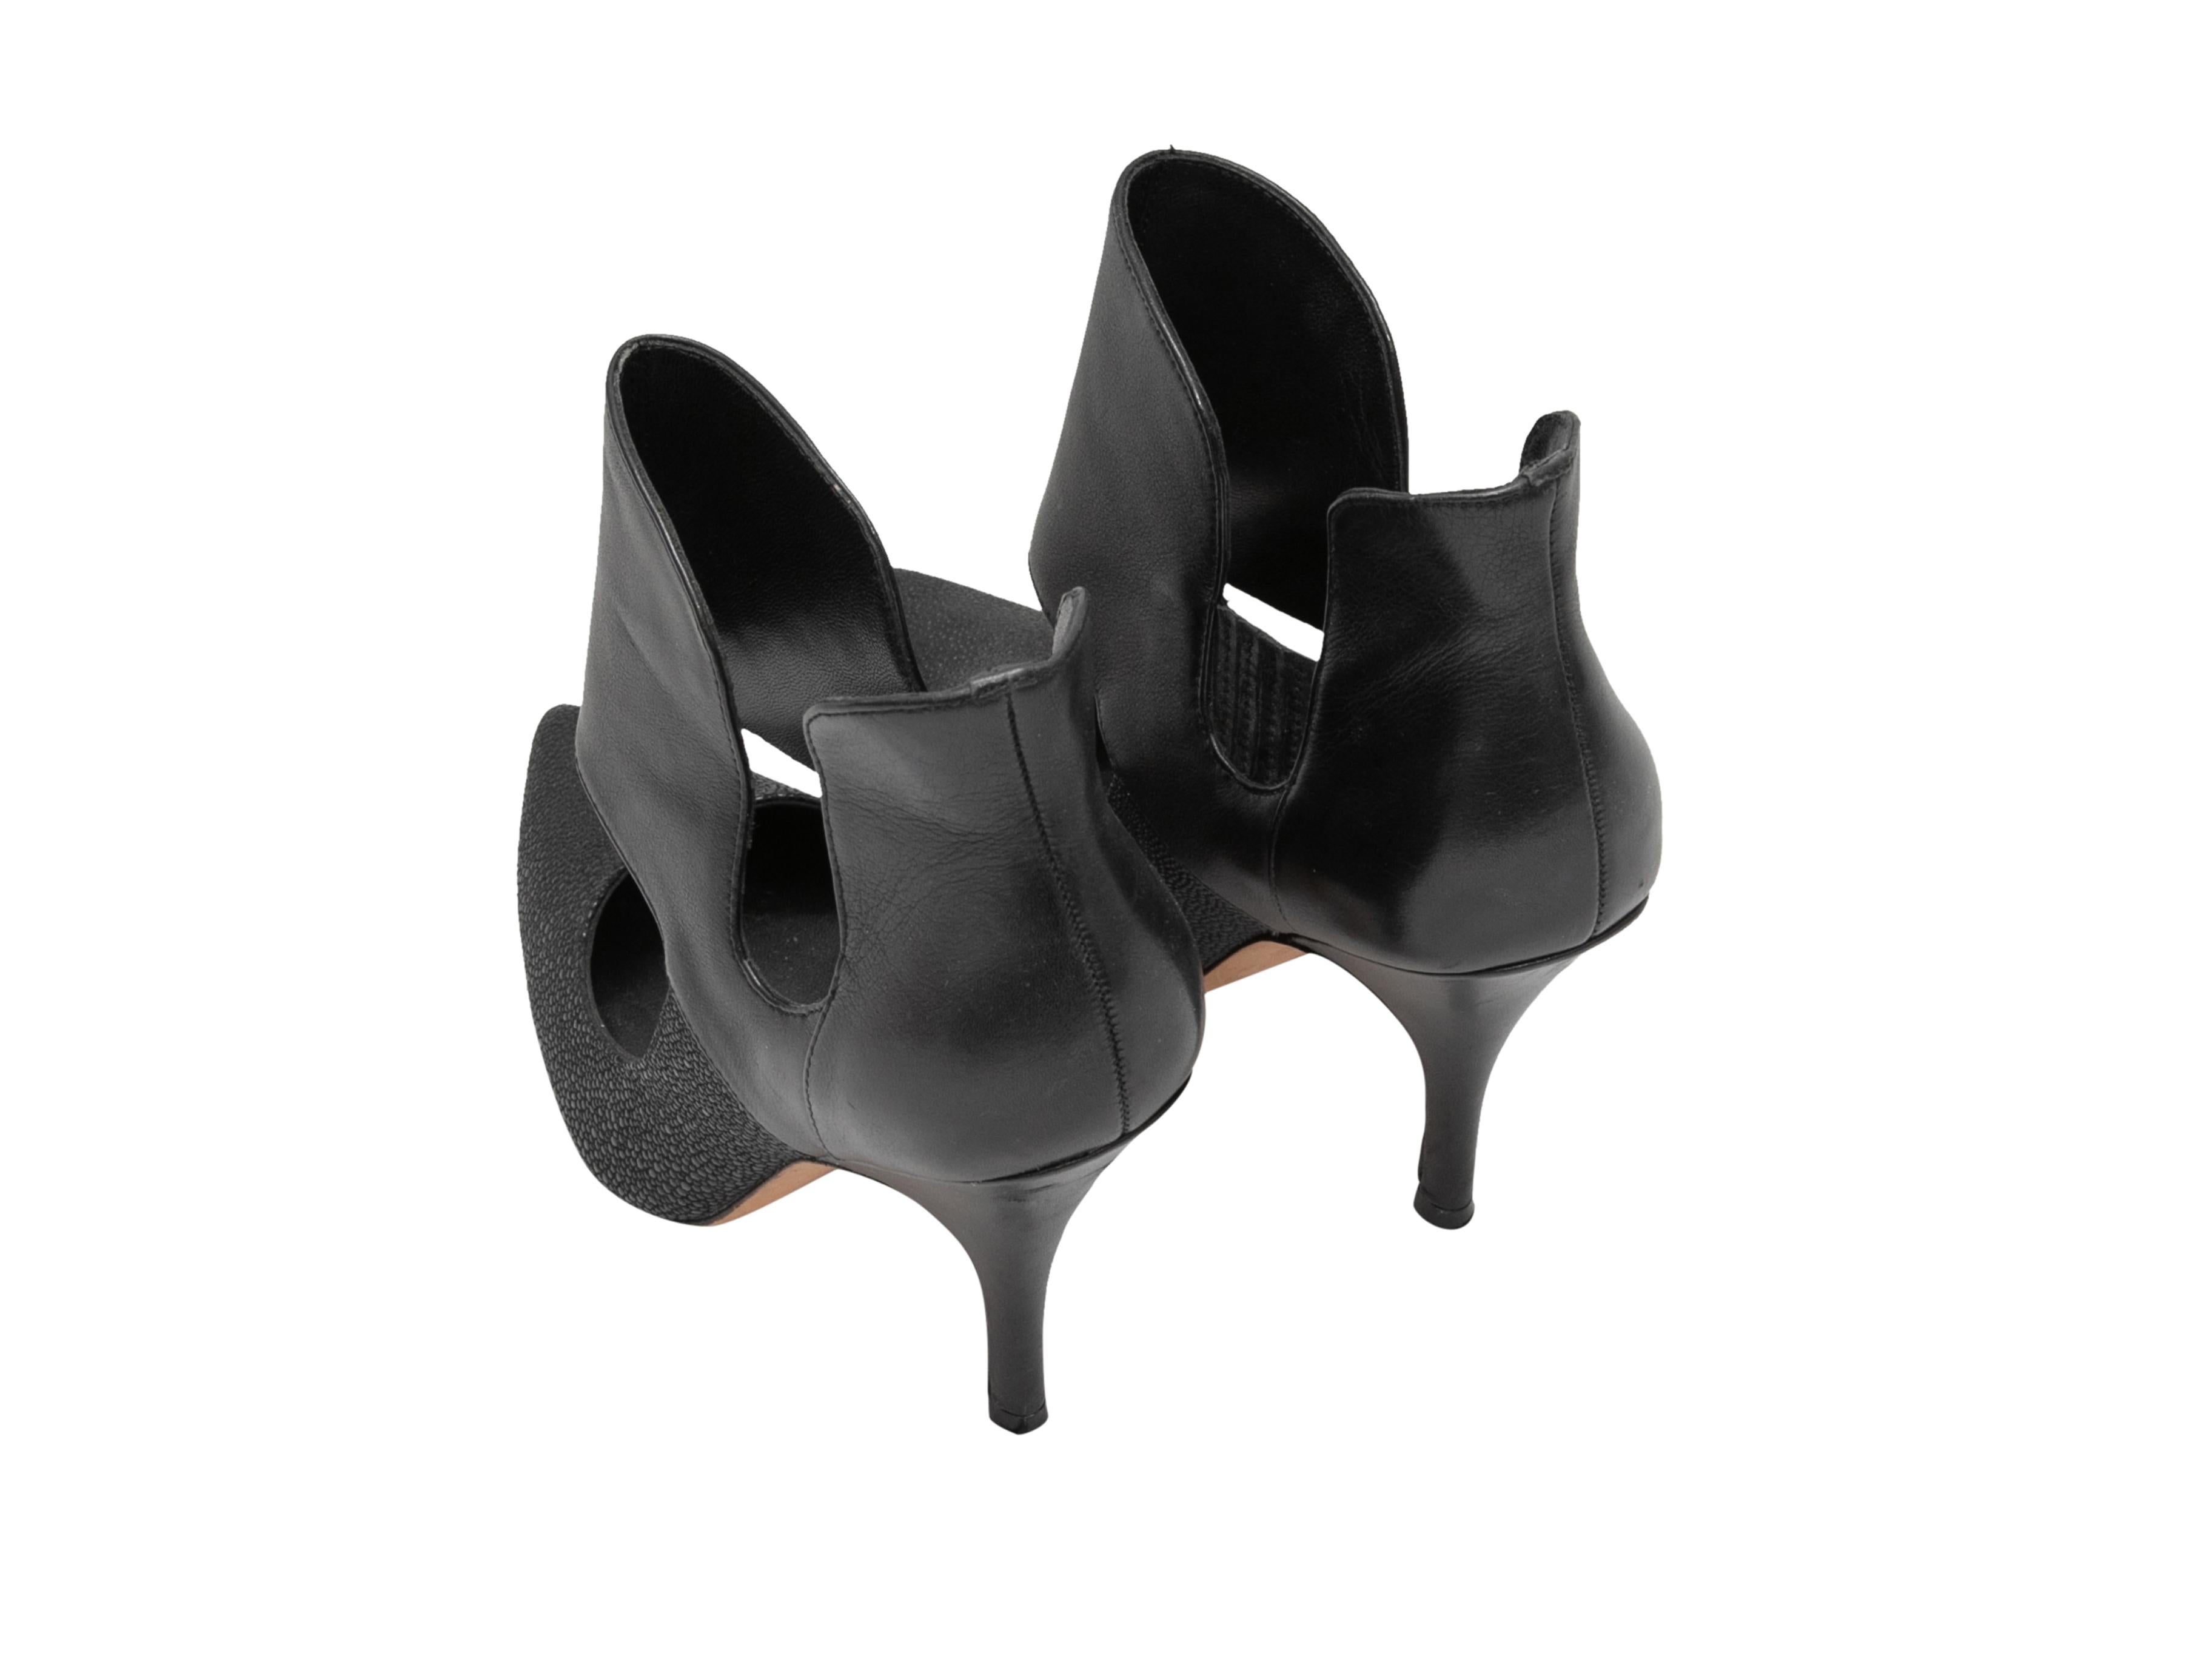 Black Jean Michel Cazabat Cutout Booties Size 36.5 In Good Condition For Sale In New York, NY